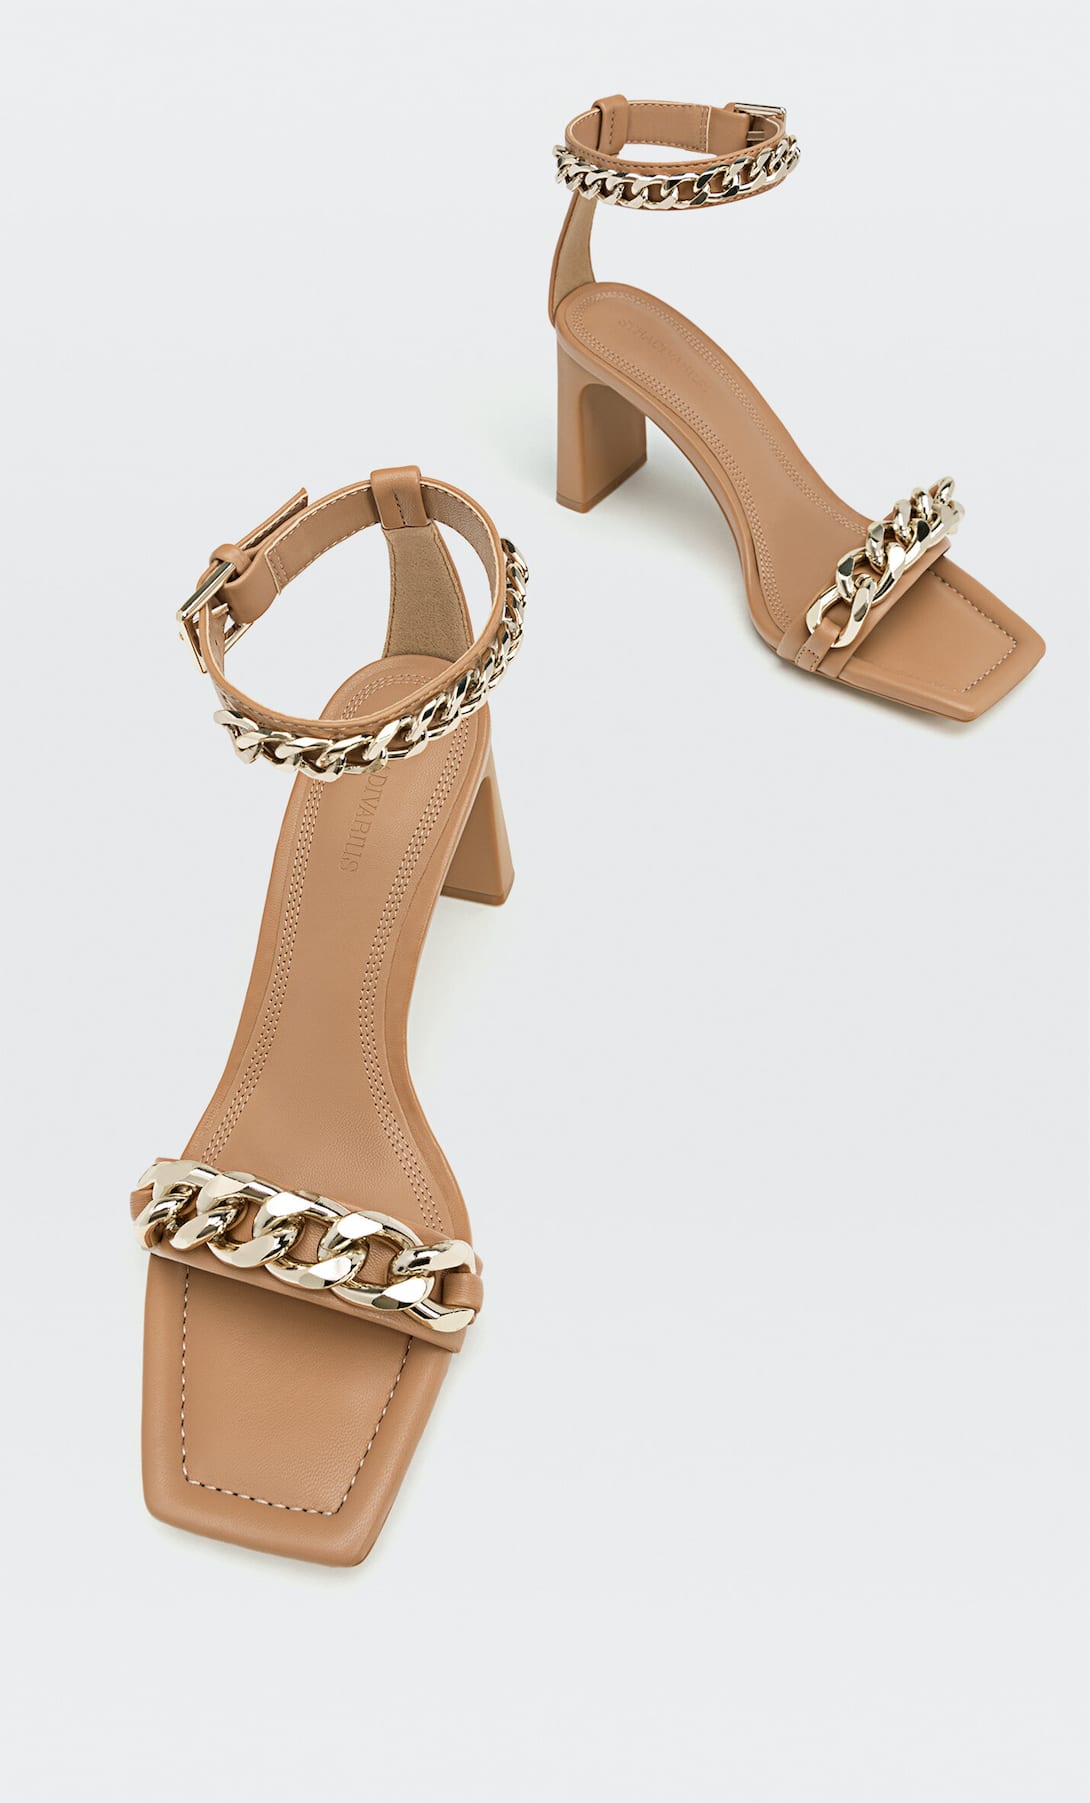 High-heel sandals with chain detail